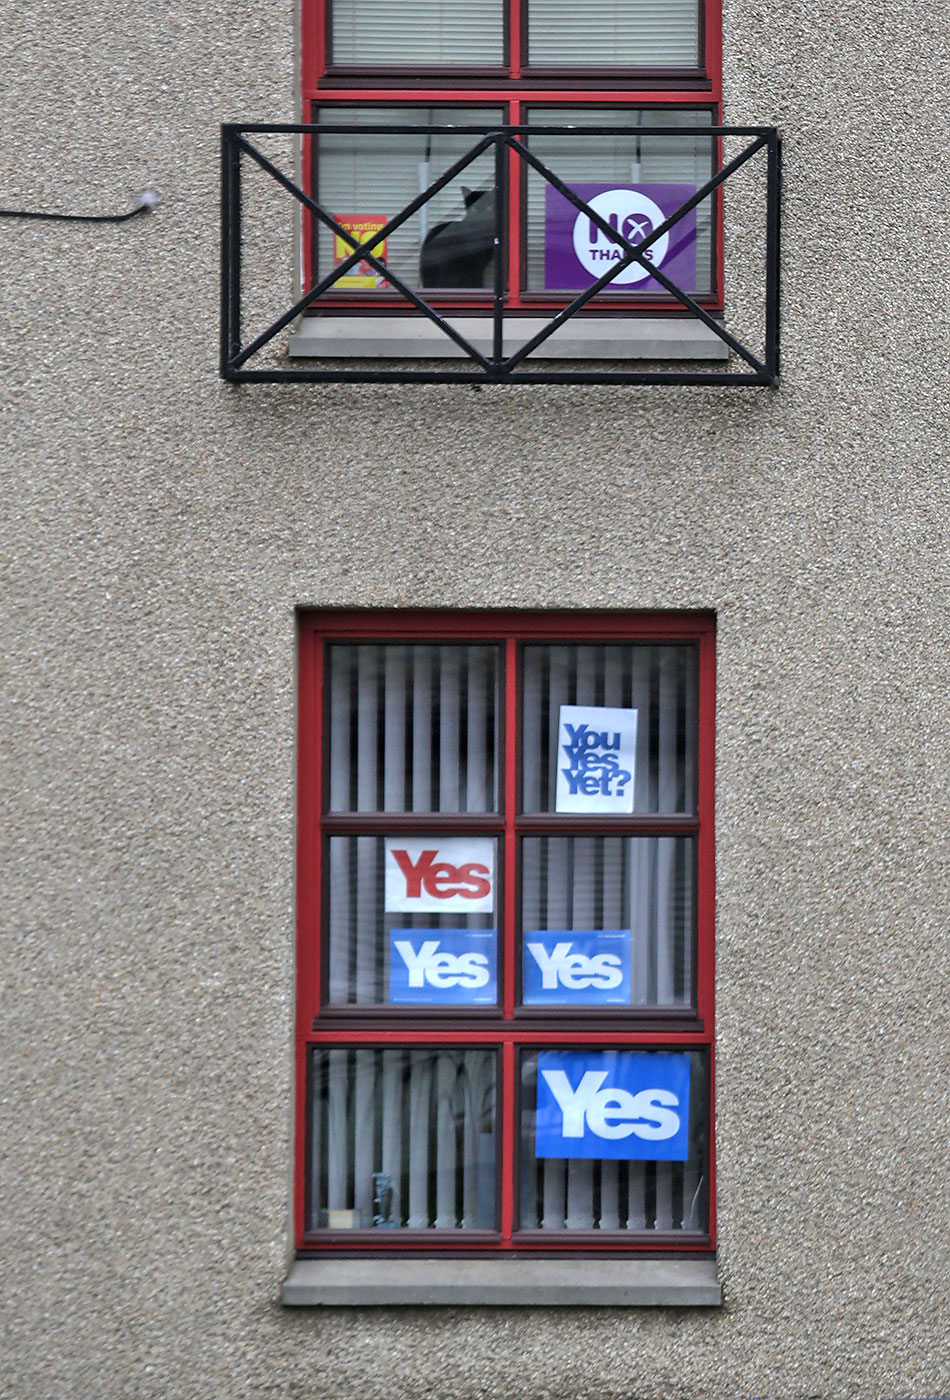 Photos taken in Edinburgh on the two days leading up to the Scottish Referendum Vote on 18 September 2014  -  'No' and 'Yes' Posters at Muirhouse Green, North Edinburgh